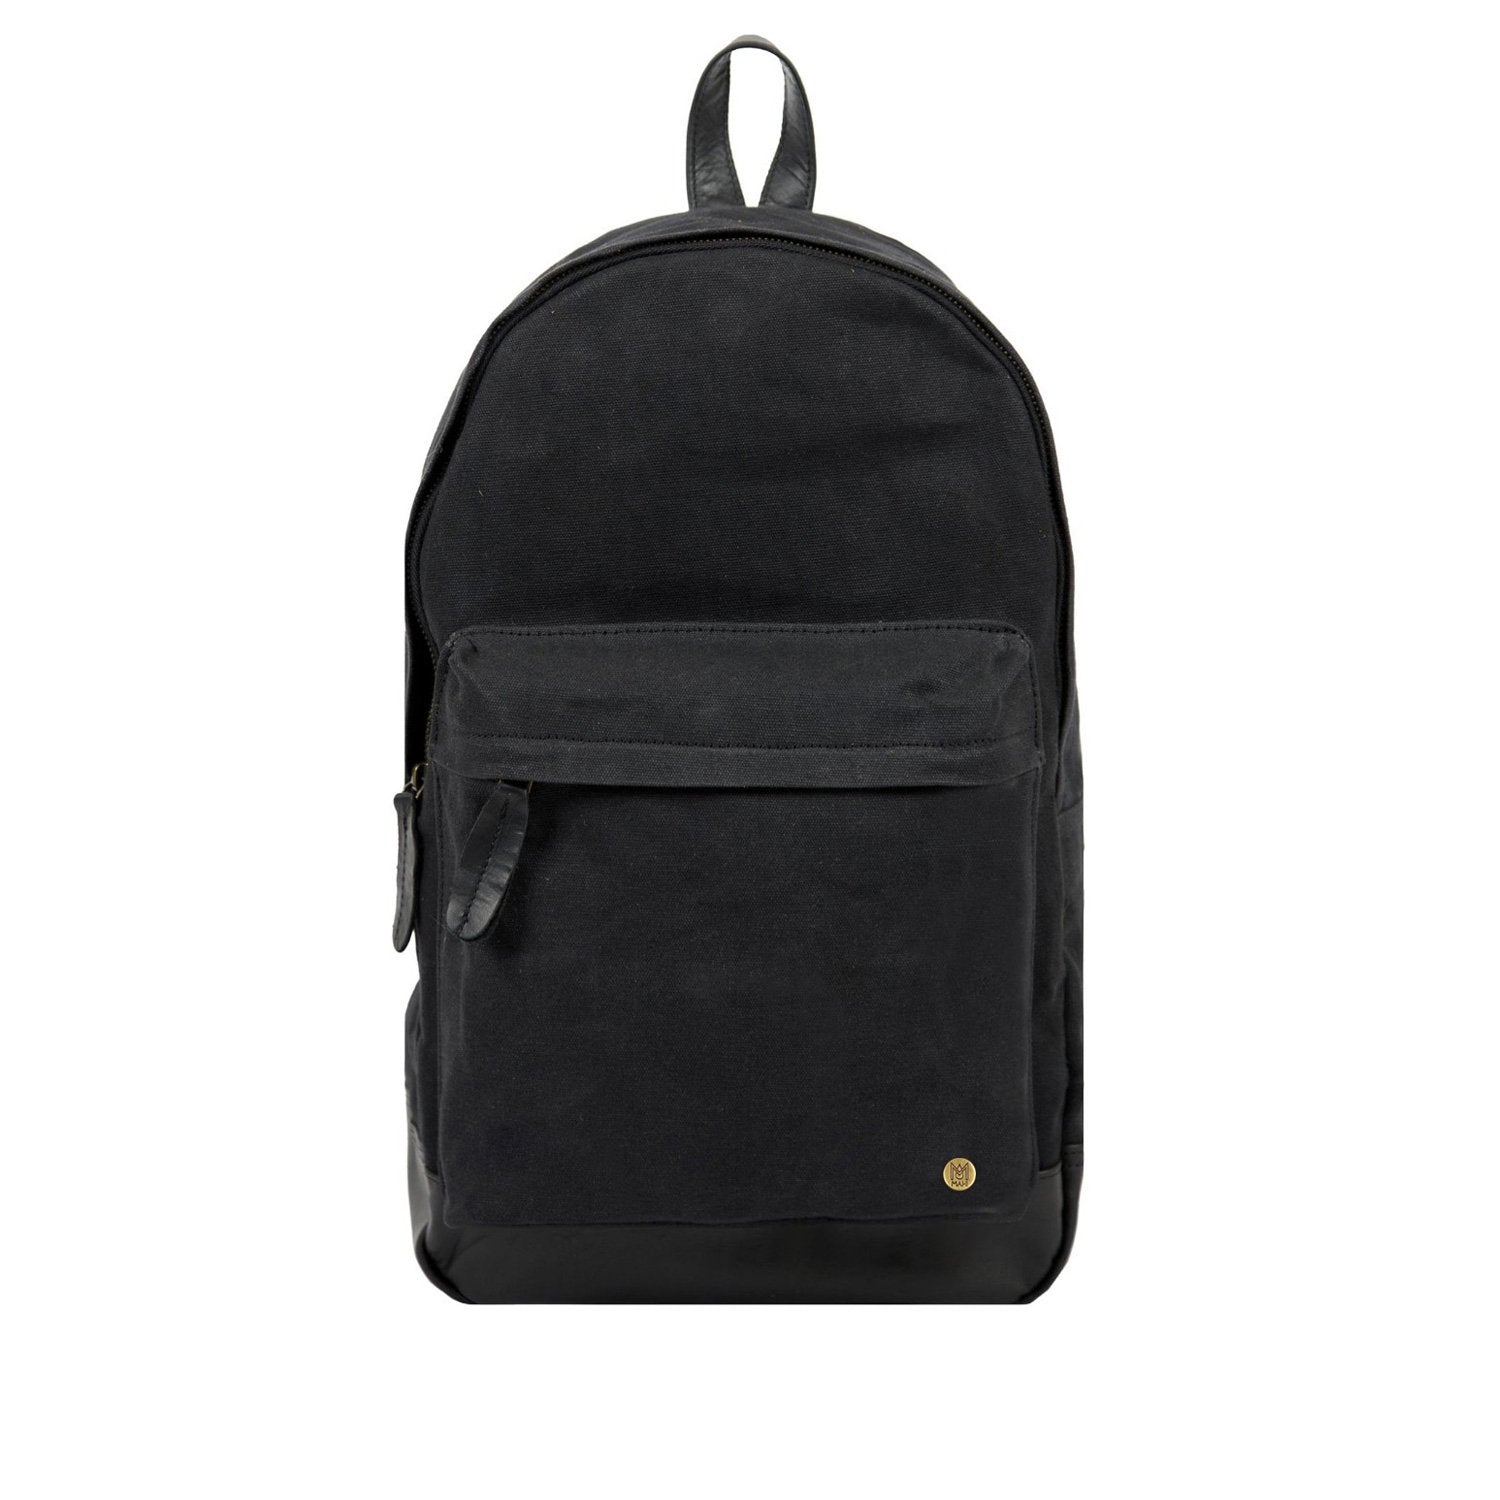 Black Canvas + Leather Backpack For School, College- Back to